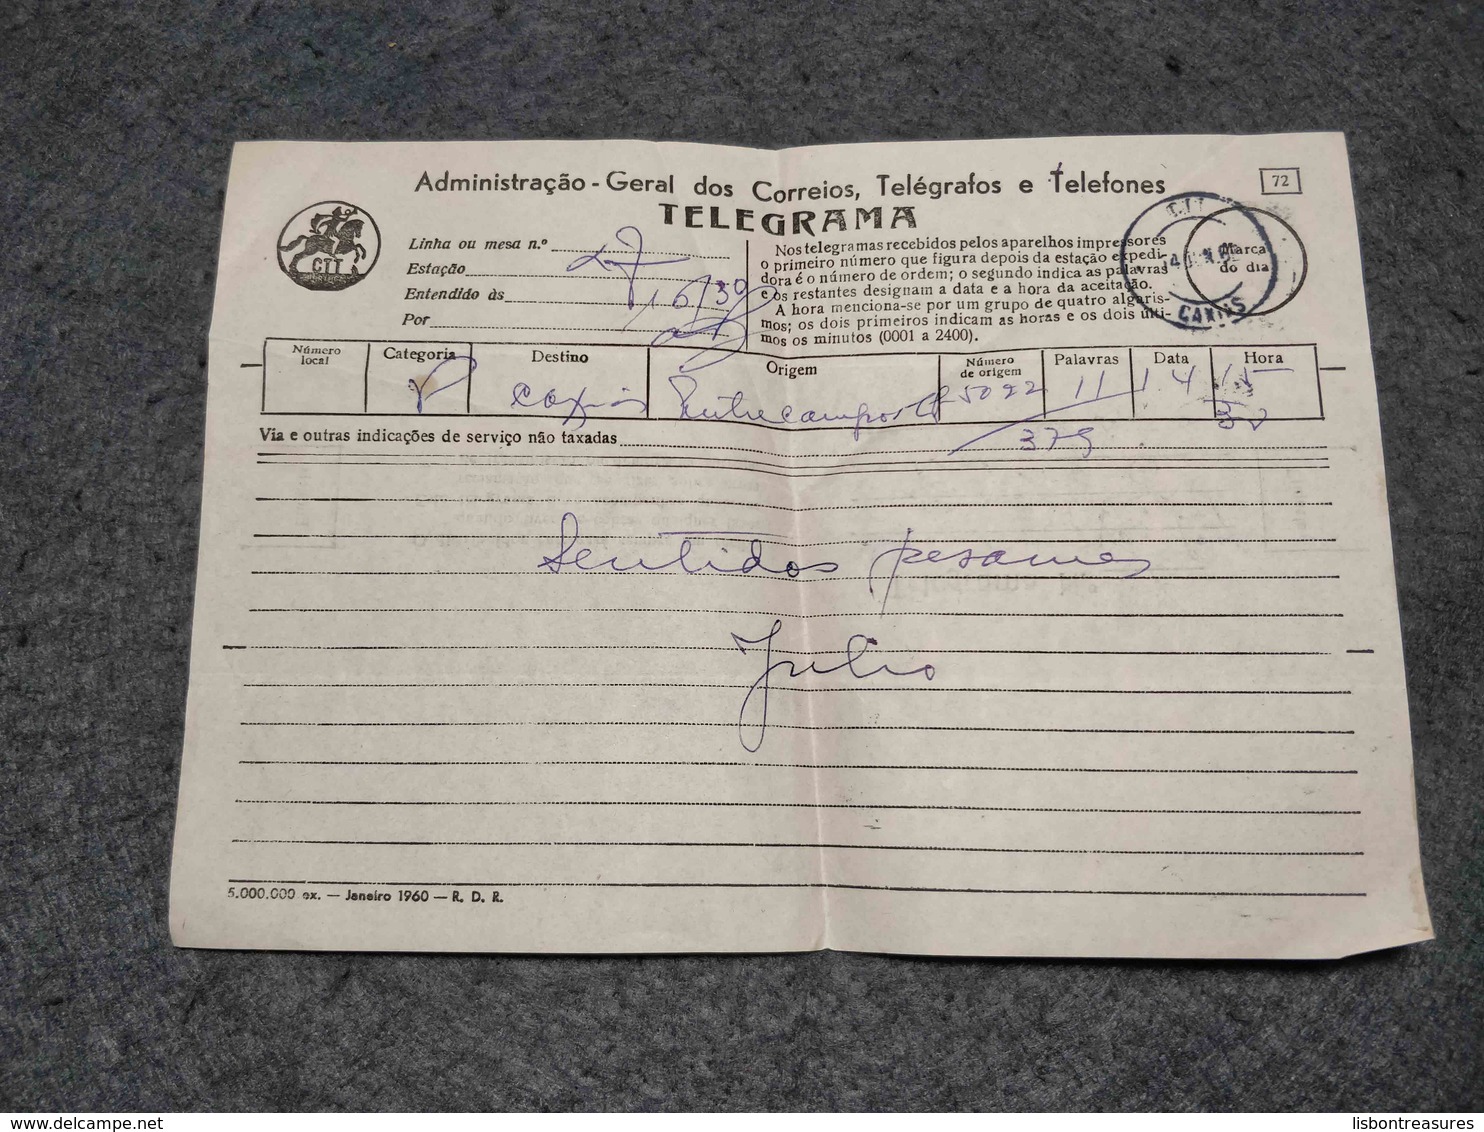 PORTUGAL CIRCULATED TELEGRAMME CAXIAS CANCEL UNKNOWN DATE - Covers & Documents